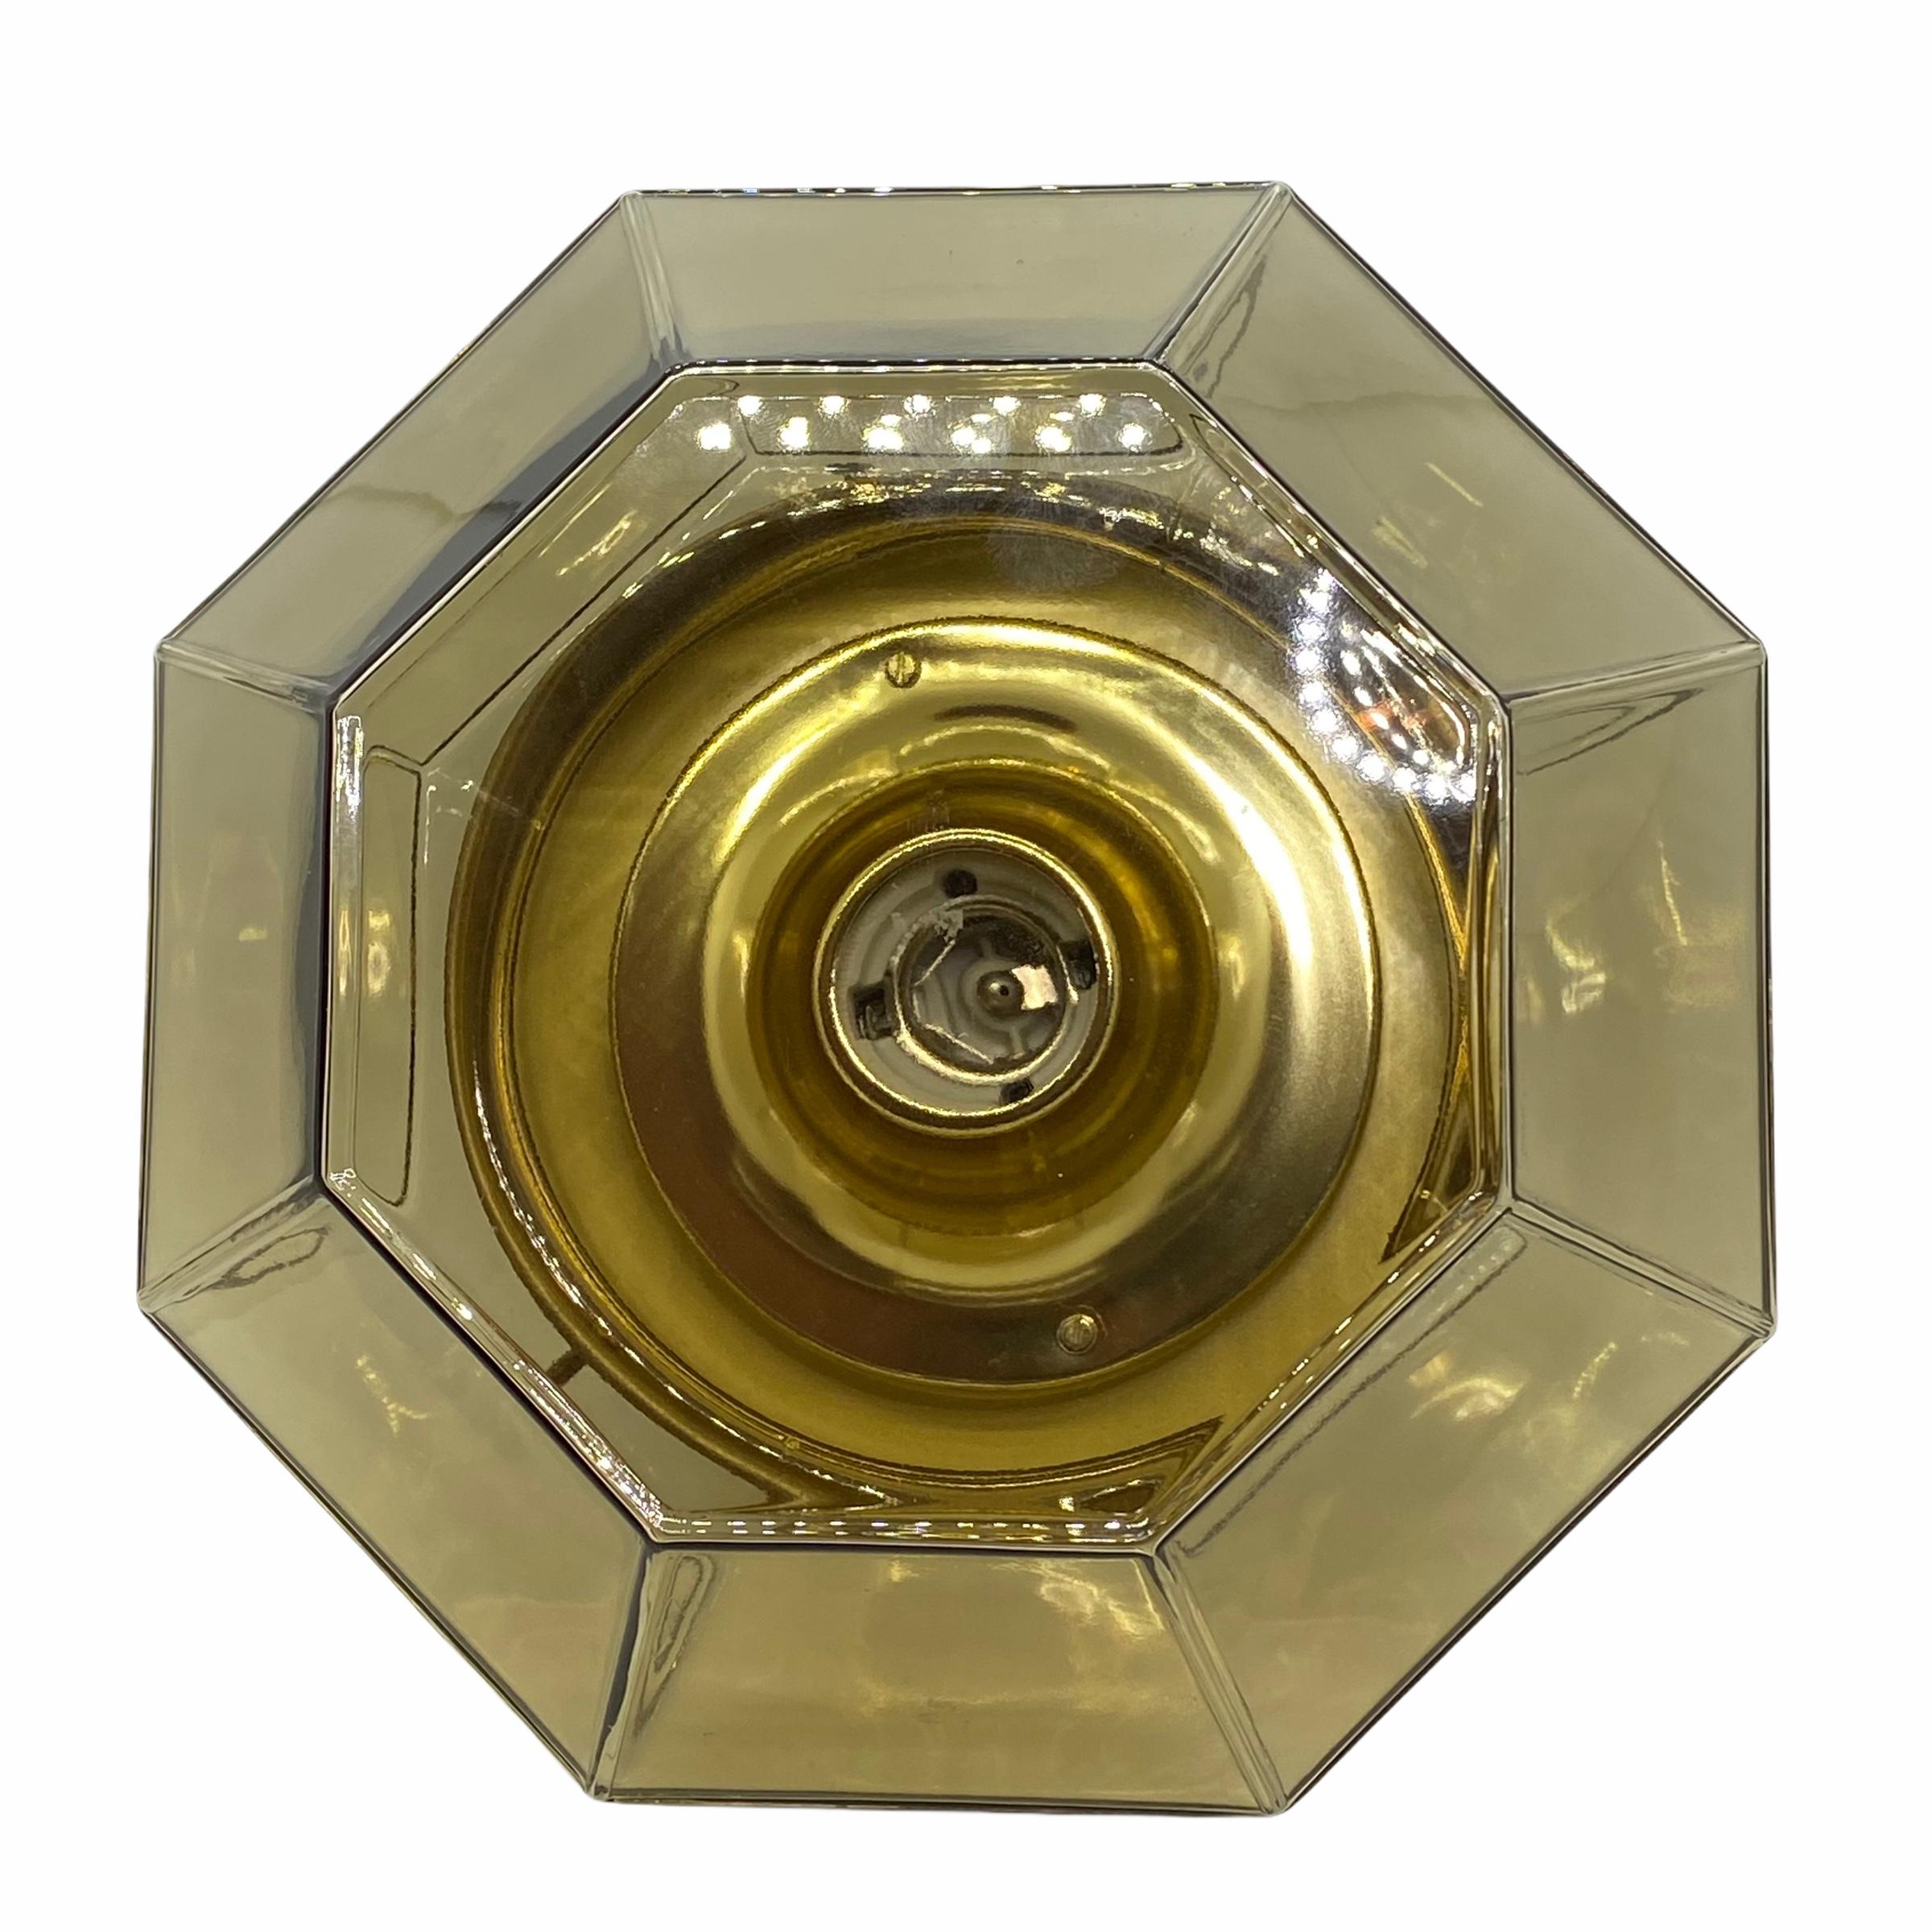 A beautiful large flush mount by German manufacturer Glashuette Limburg. The large geometric glass element is supported by a polished brass plate with one light sources. Beautiful diamond shaped glass on a metal fixture. The Fixture requires one